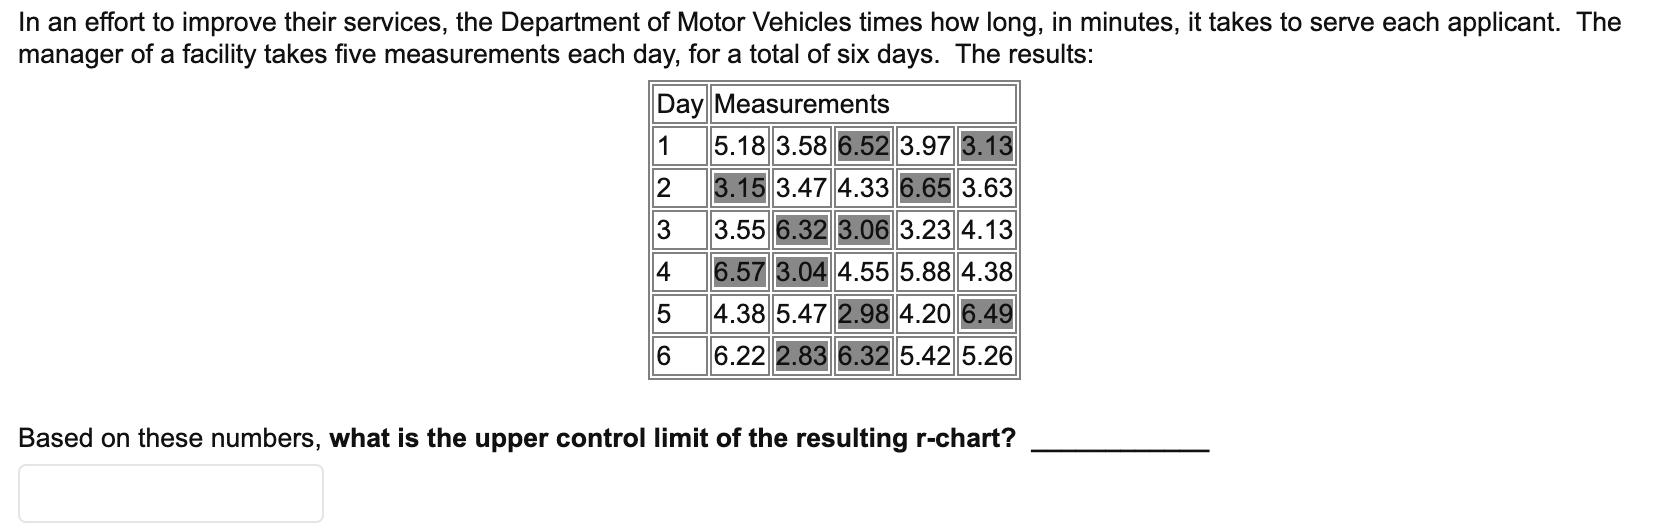 In an effort to improve their services, the Department of Motor Vehicles times how long, in minutes, it takes